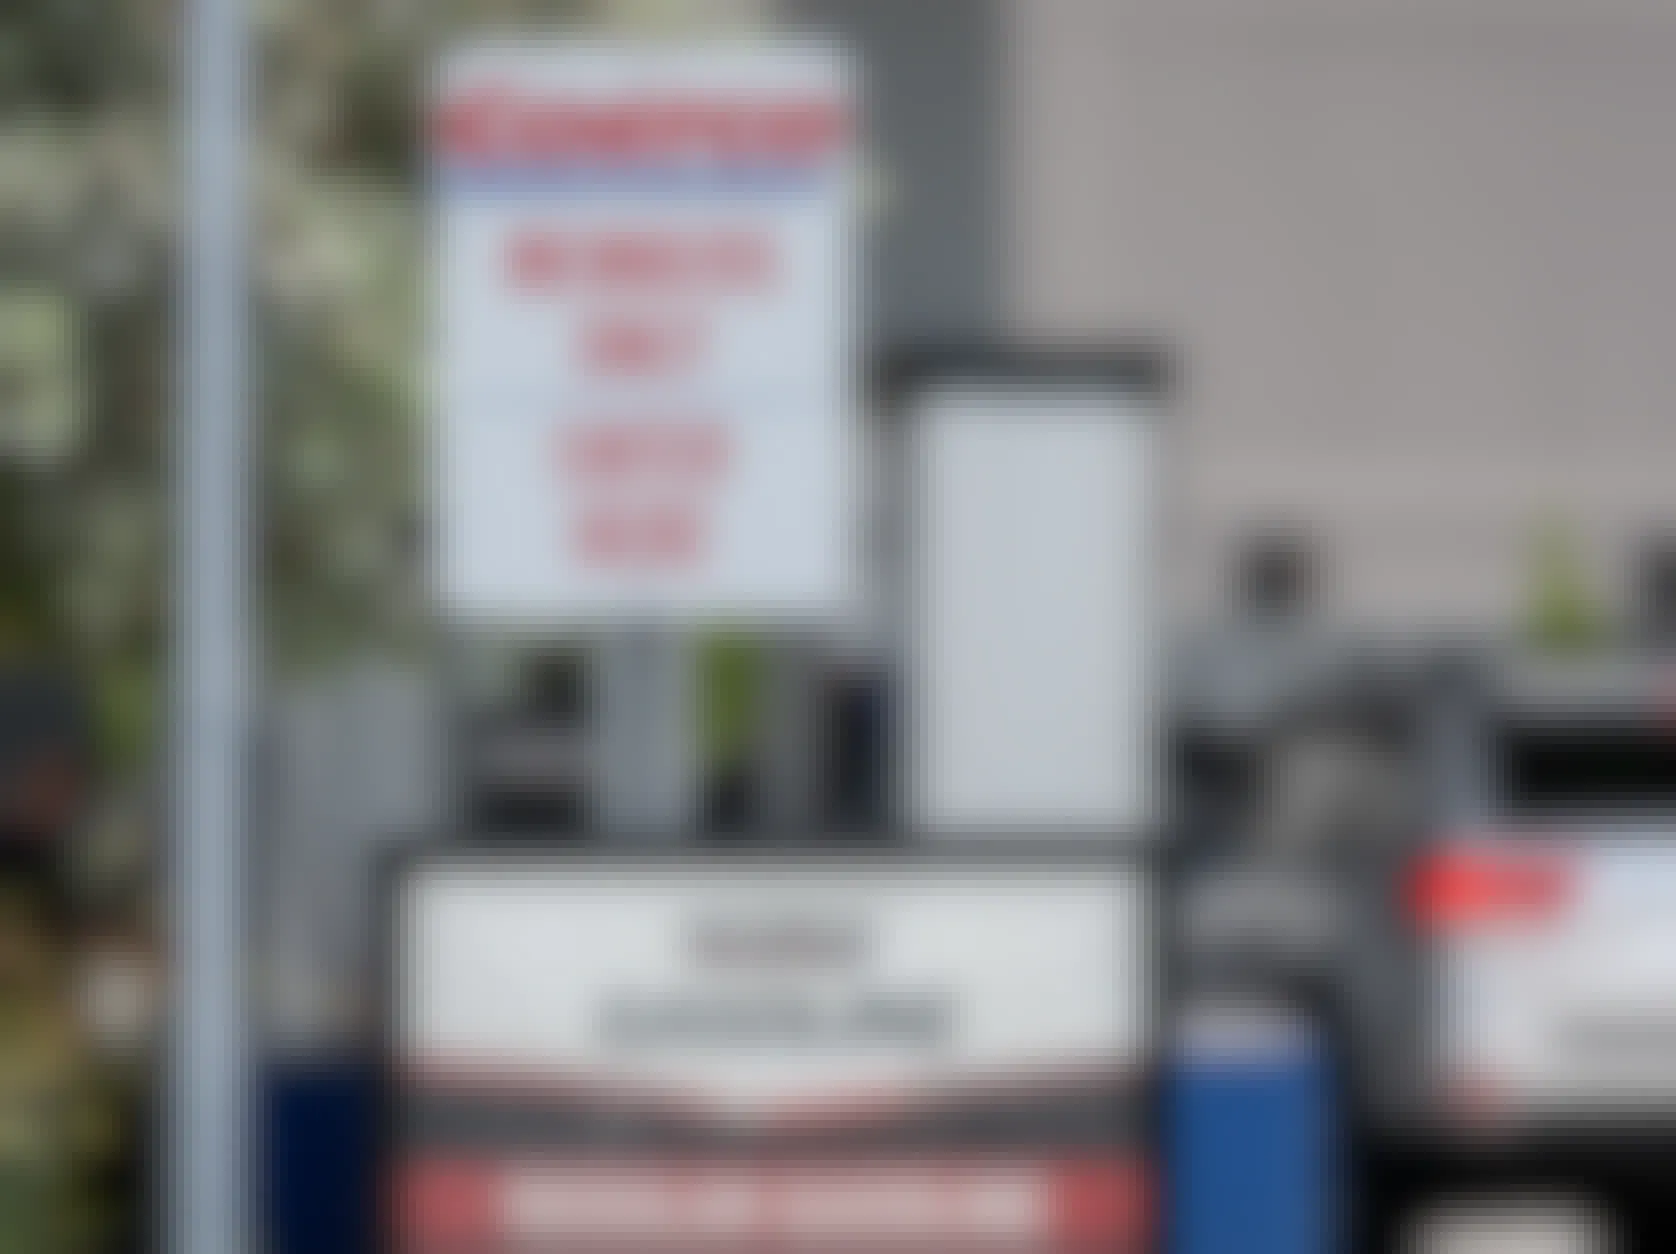 A Costco Members Only sign at the entrance of the gas station.